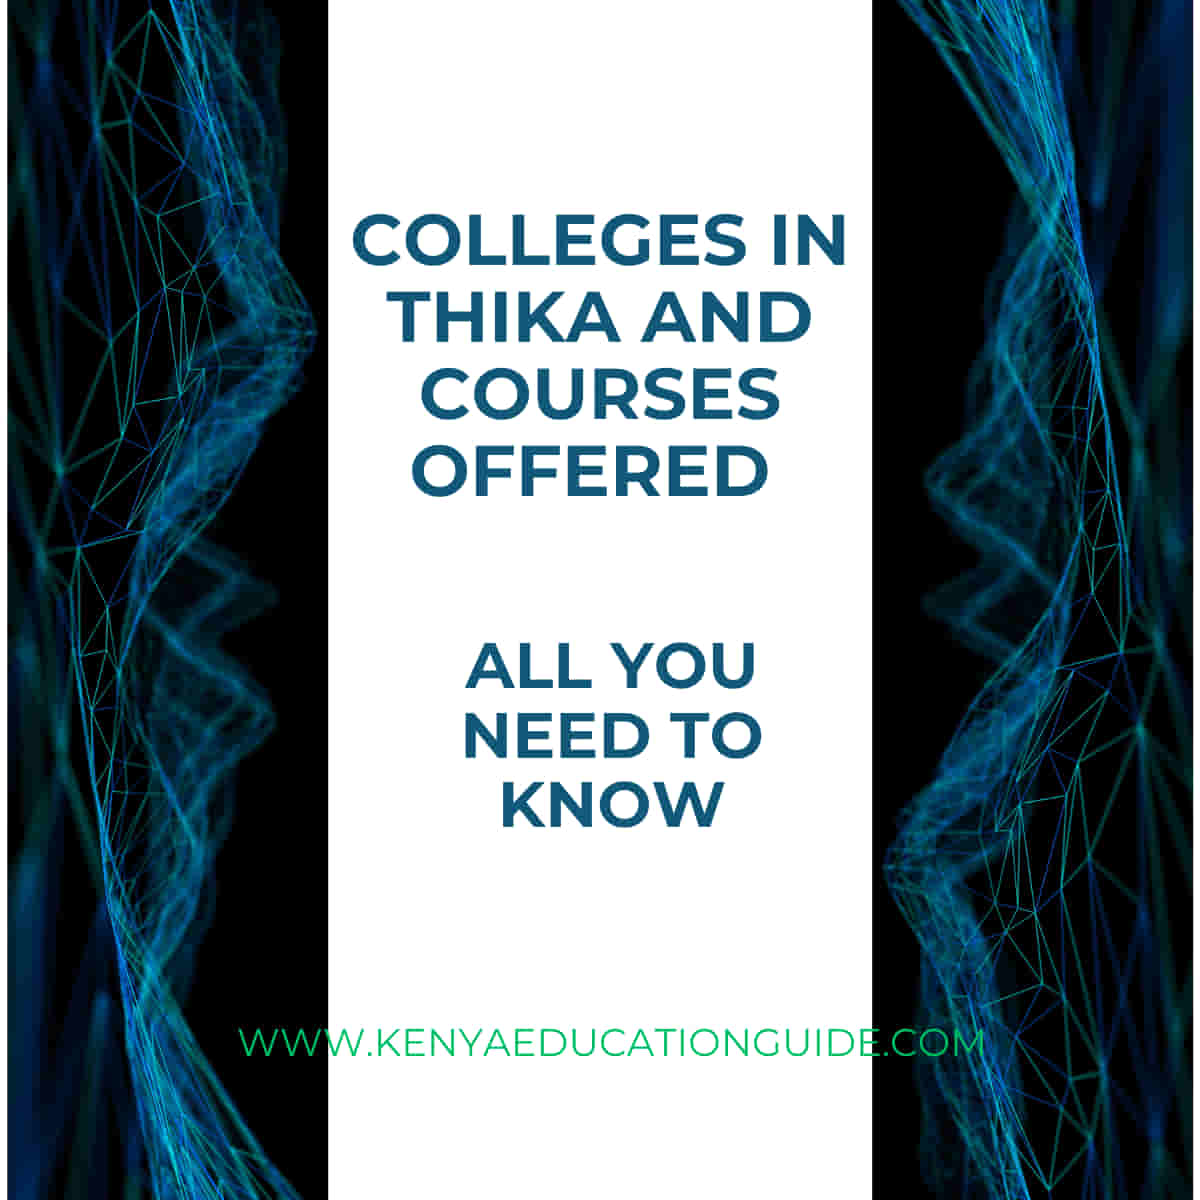 Colleges in Thika and courses offered